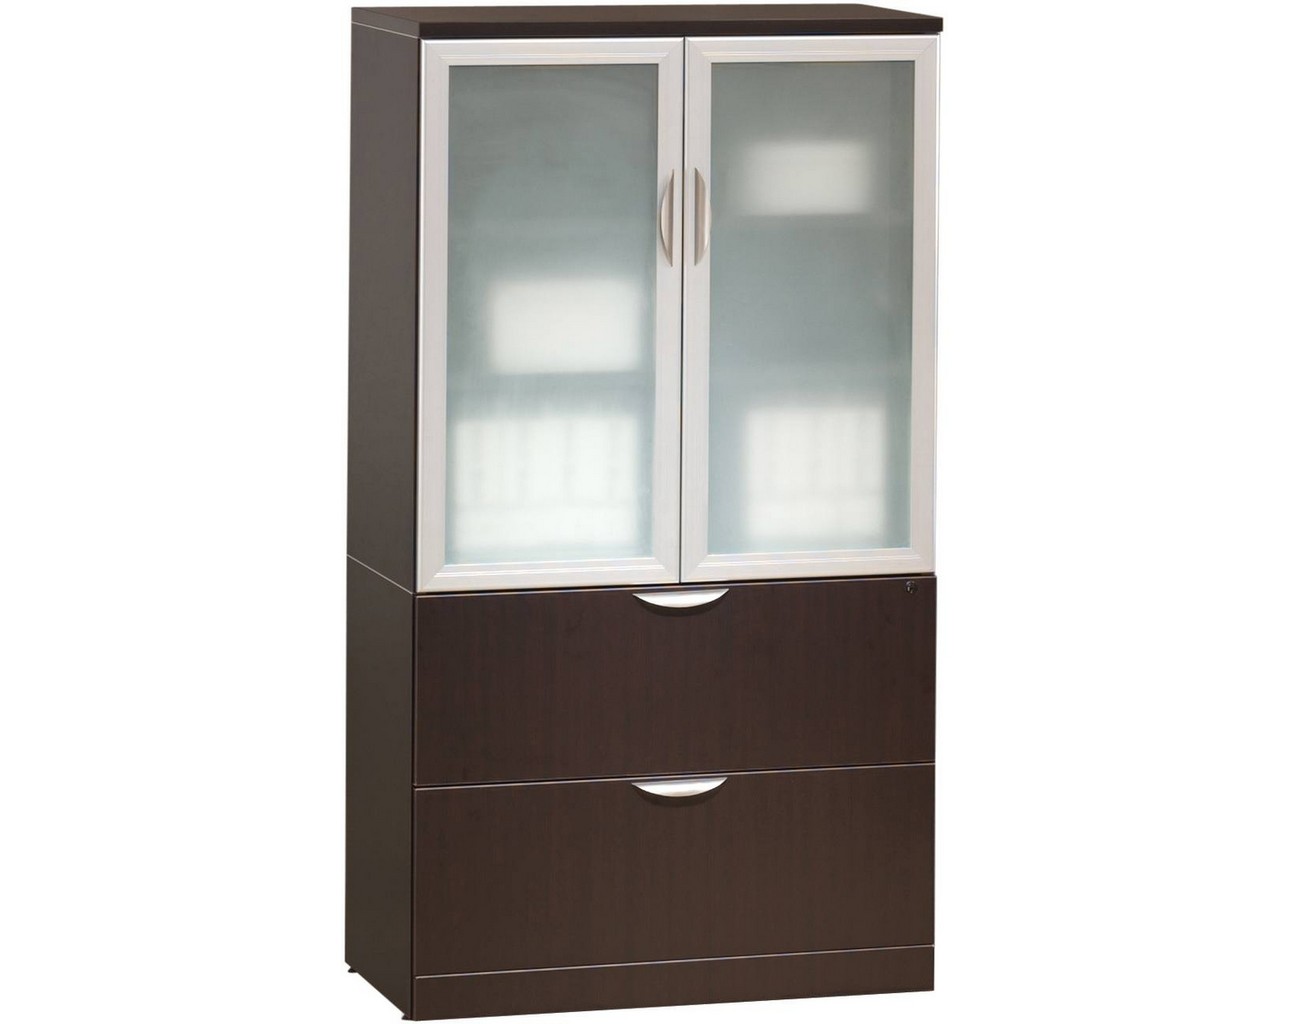 Locking Storage Cabinet and Lateral File Combo Unit with Glass Doors – Espresso